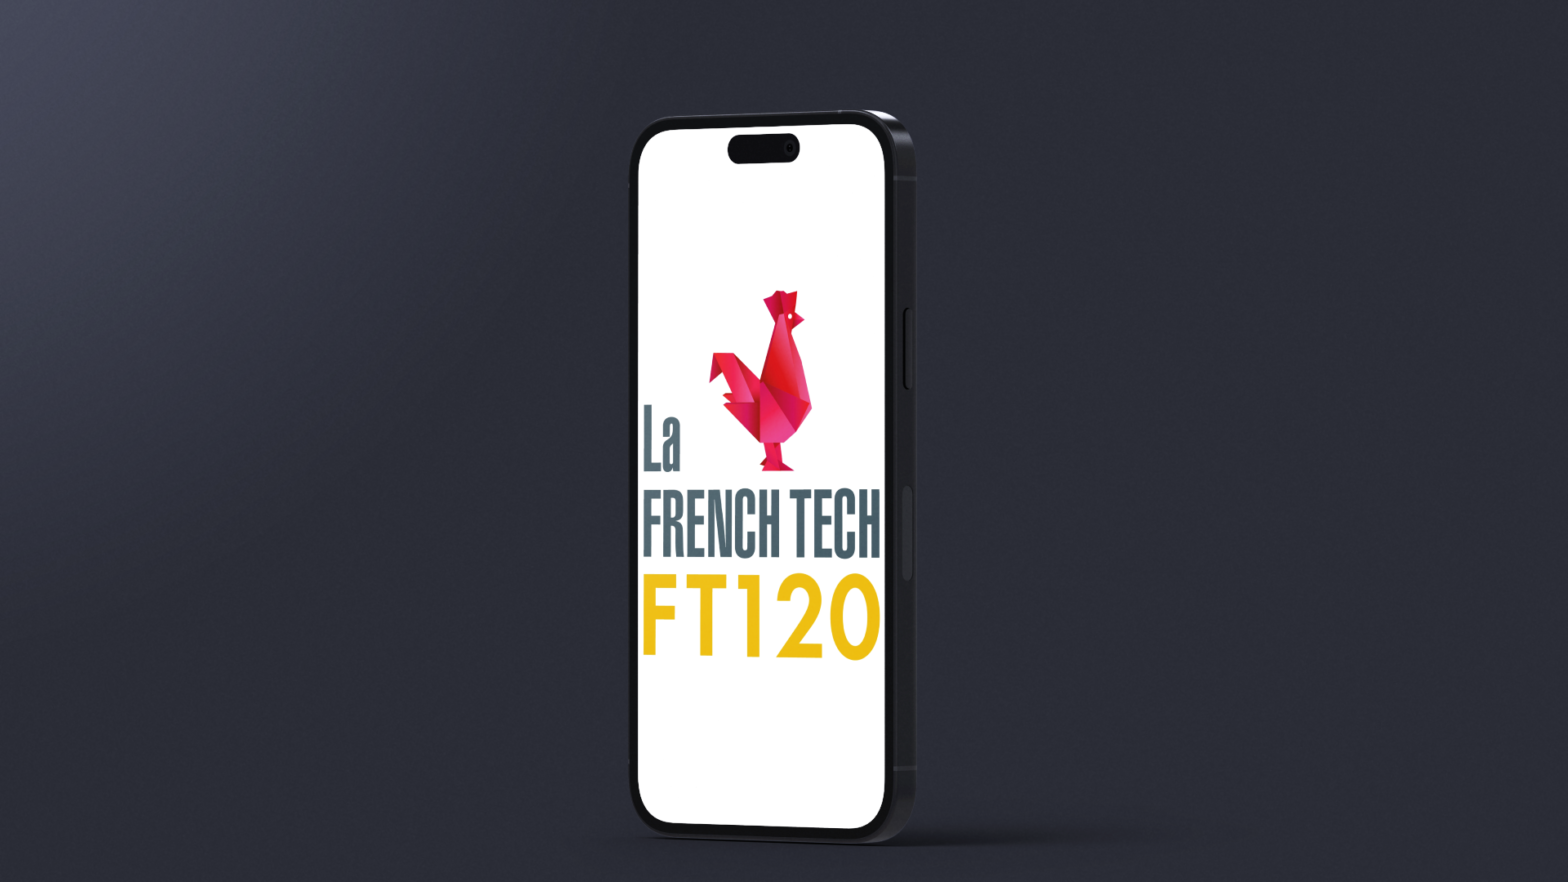 Homa, TapNation and Voodoo were  selected for French Tech 120